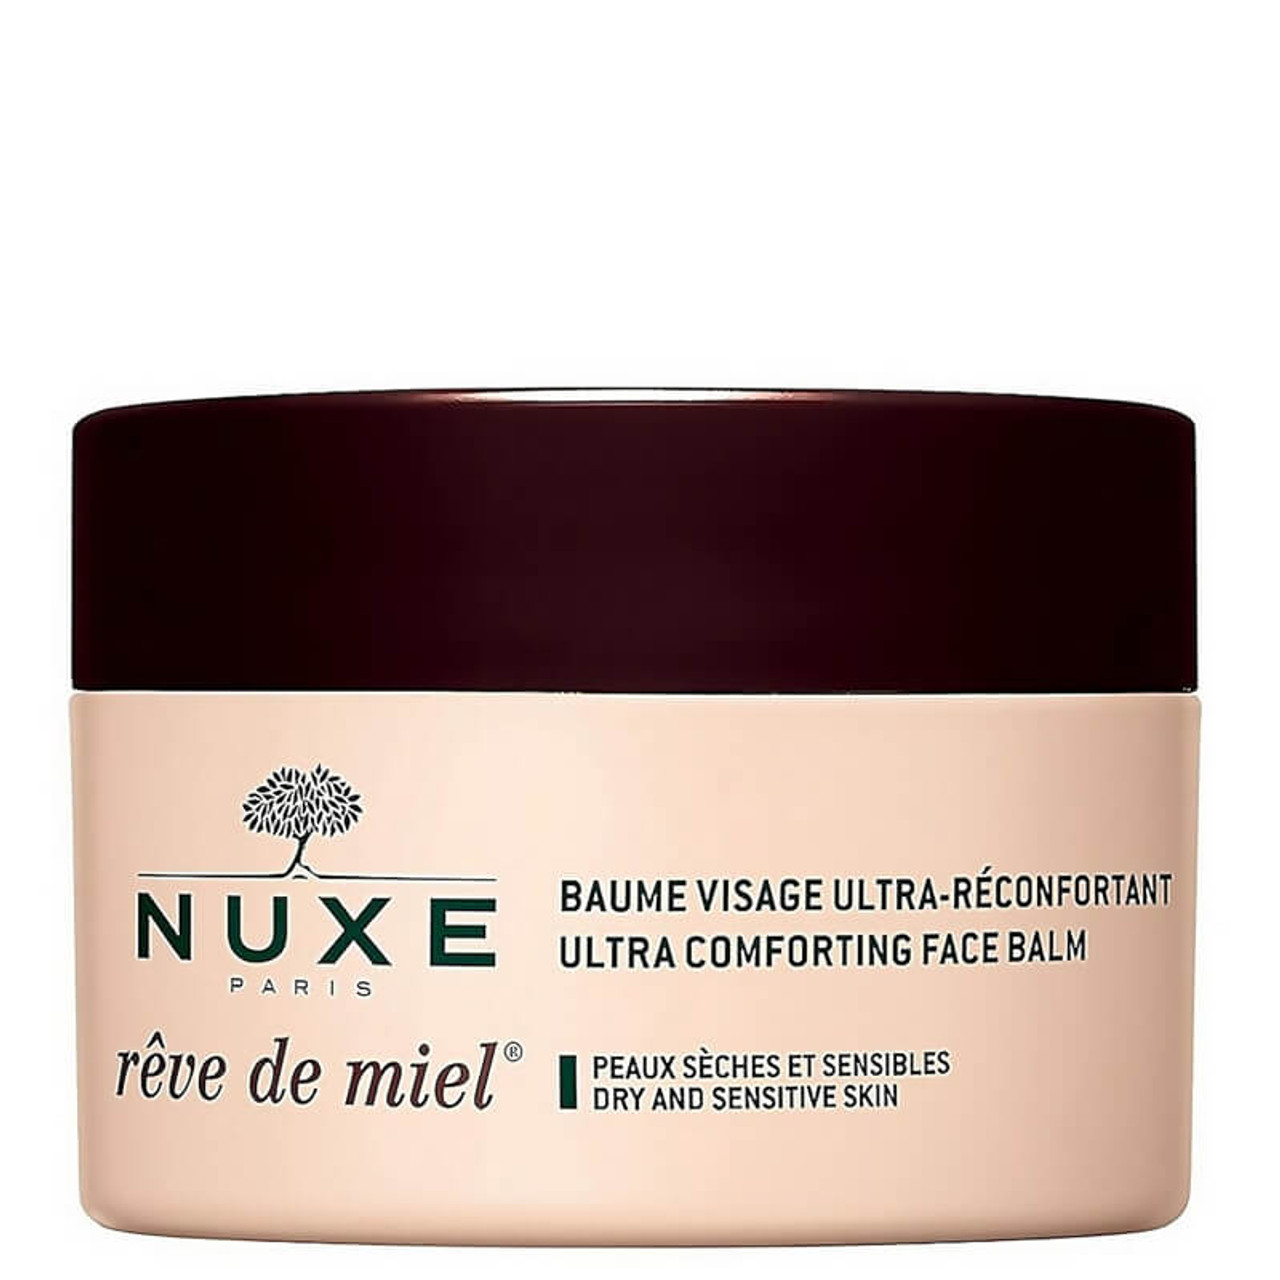 NUXE Ultra-Comforting Body Cream, Rêve de Miel - Body Moisturizer with Shea  Butter for Dry, Sensitive Skin, 13.4 Oz